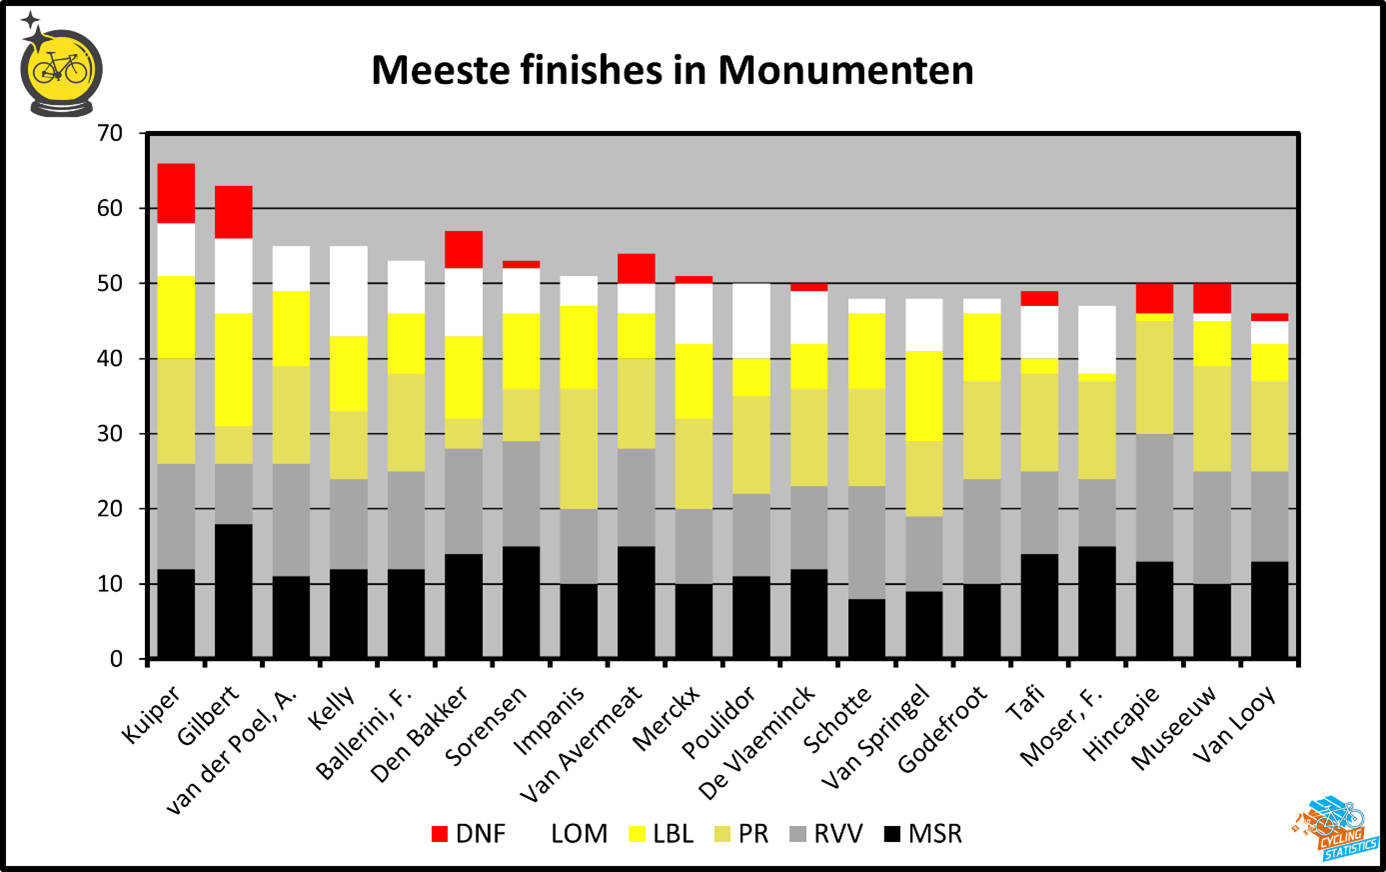 Most finishes in Monuments